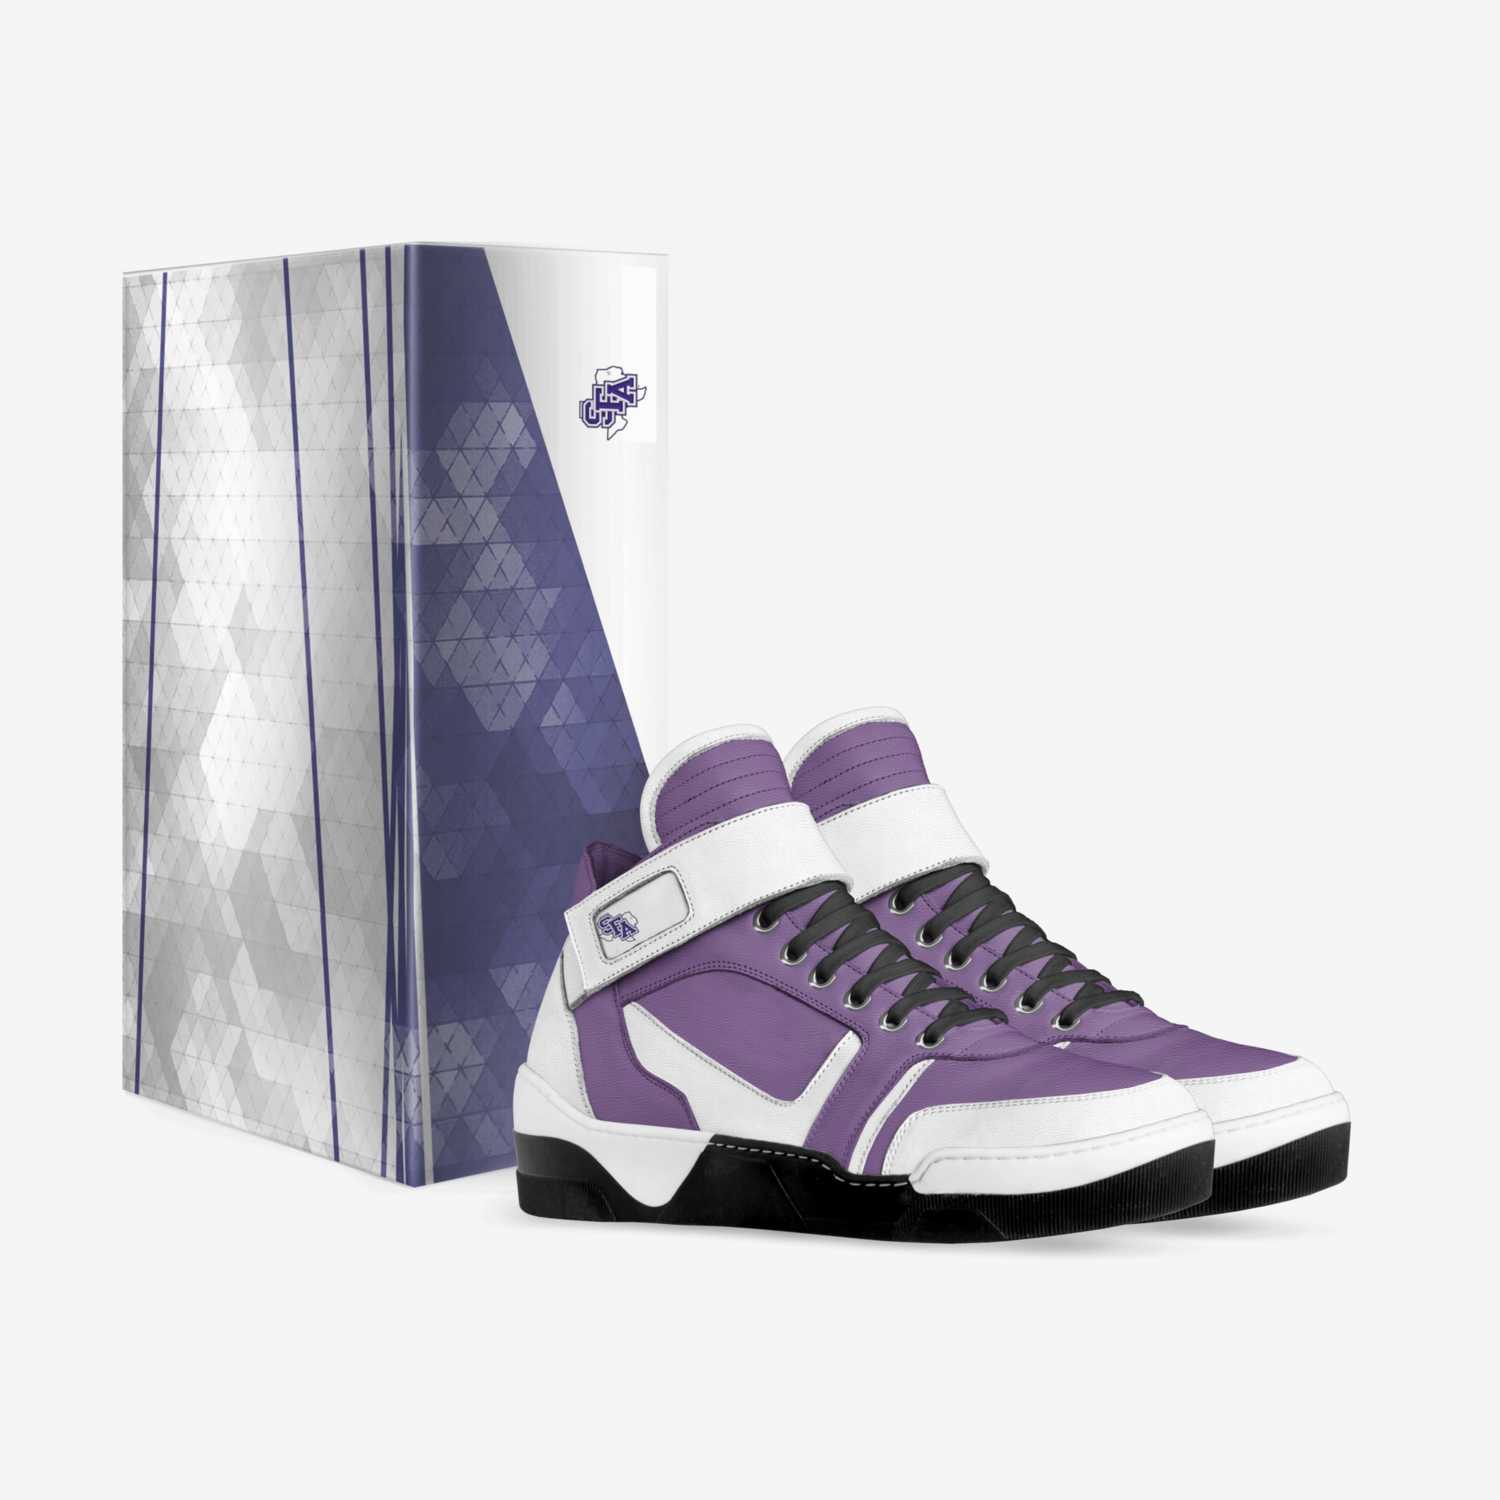 AxeEm' custom made in Italy shoes by Grayson Goheen | Box view